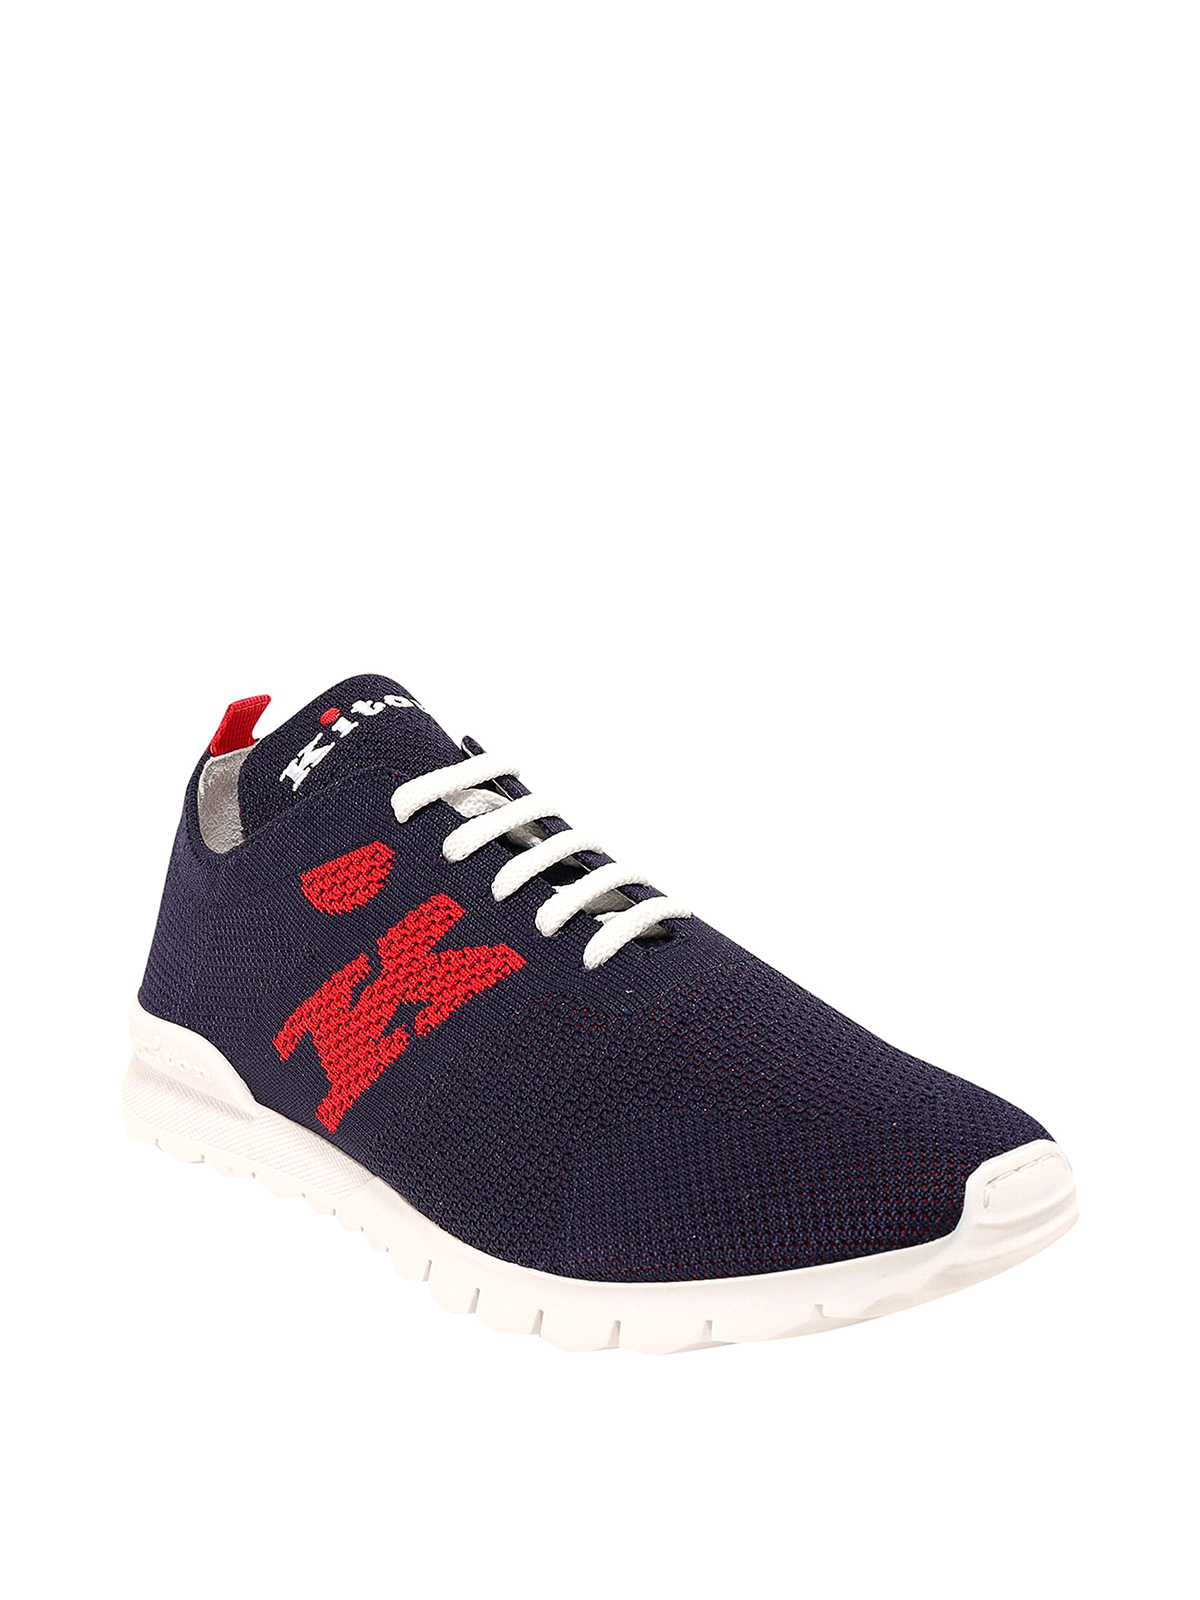 Trainers Kiton - Open work cotton sneakers - USSKDOTN0081802 | iKRIX.com